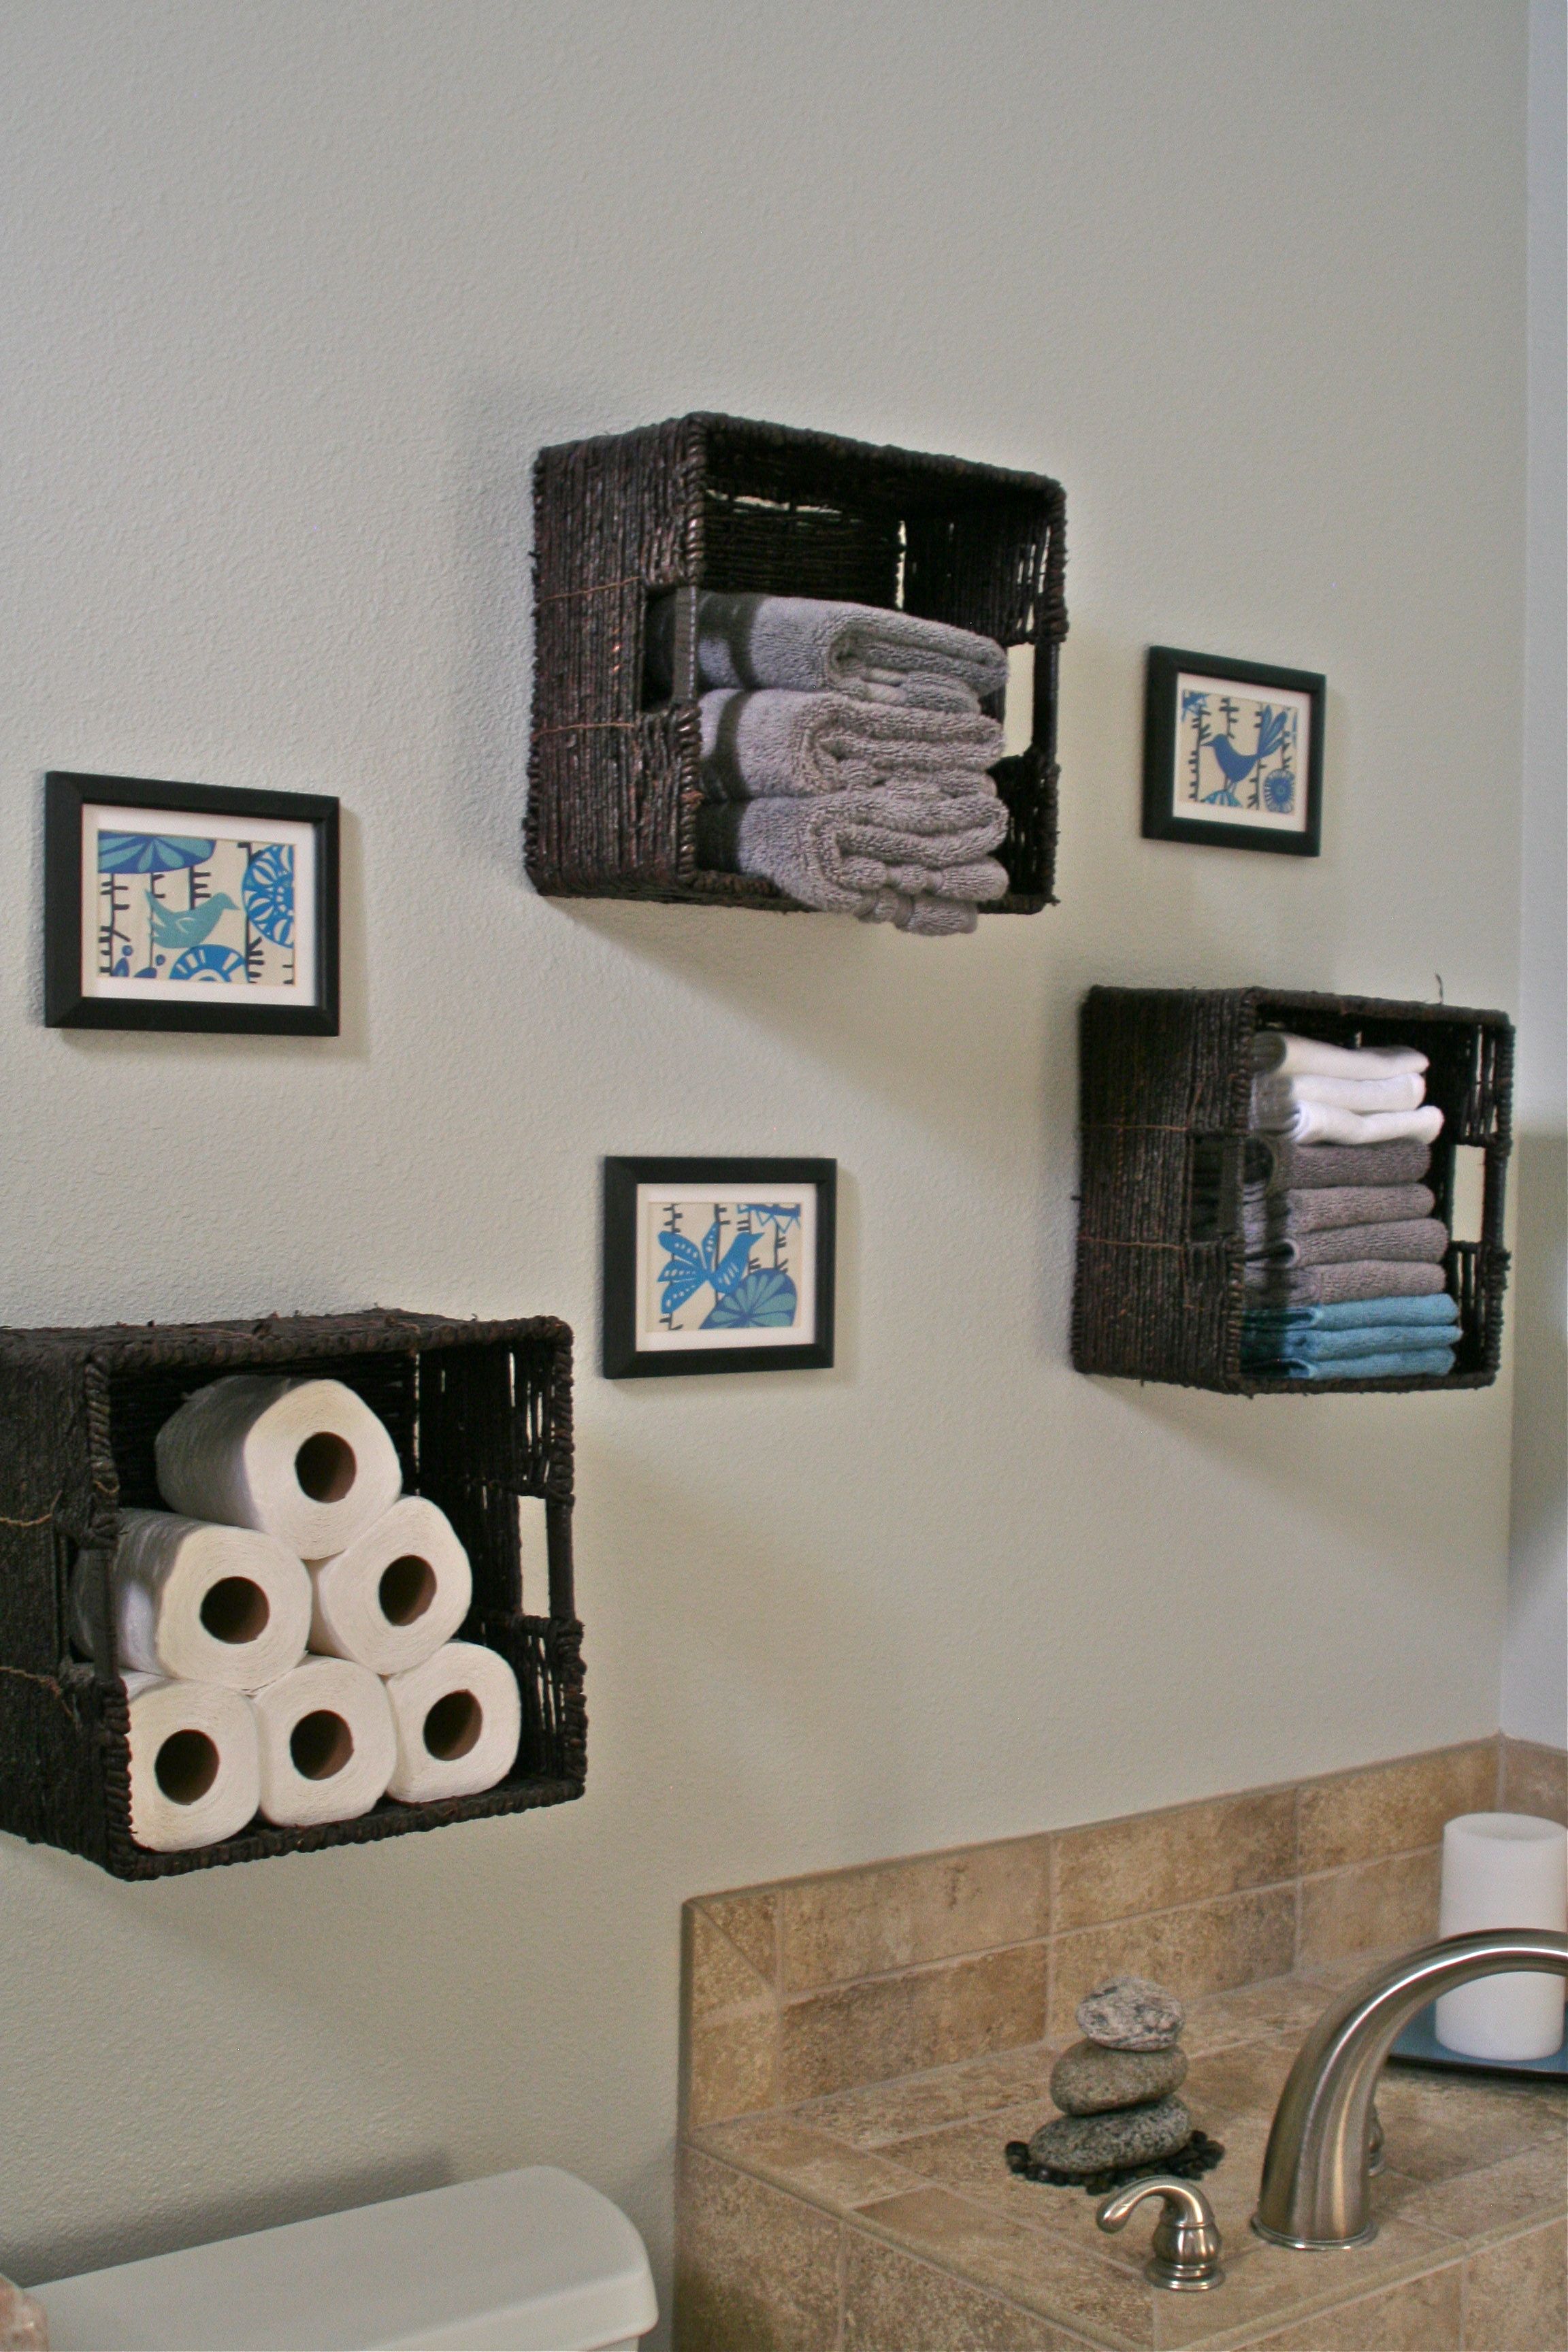 Bathroom storage - baskets for towels, toilet paper etc Love the teal!